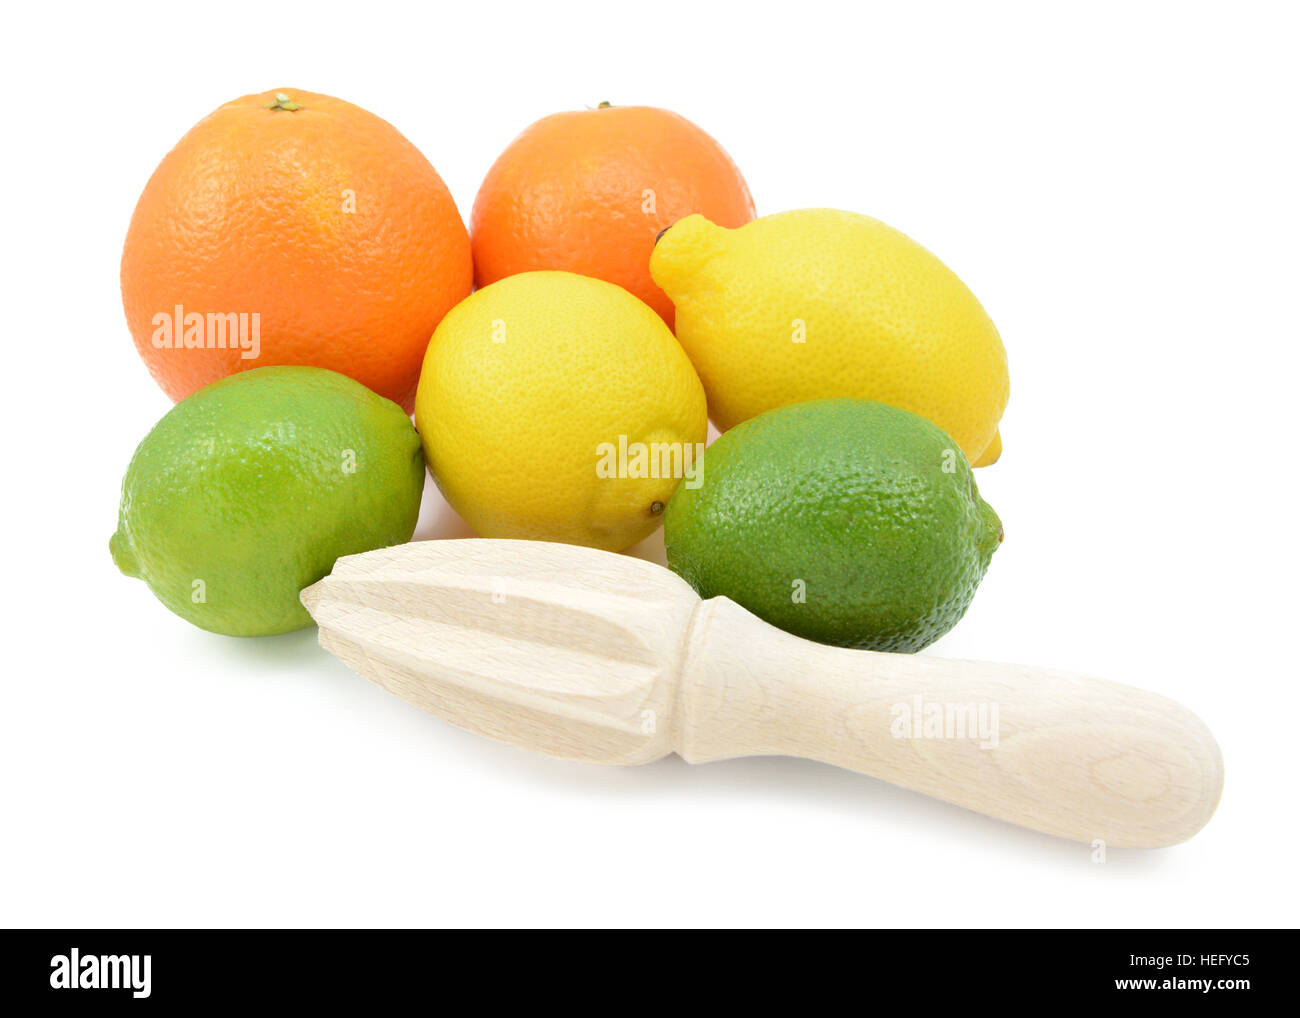 Six citrus fruits - limes, lemons and oranges - with a wooden reamer, isolated on a white background Stock Photo